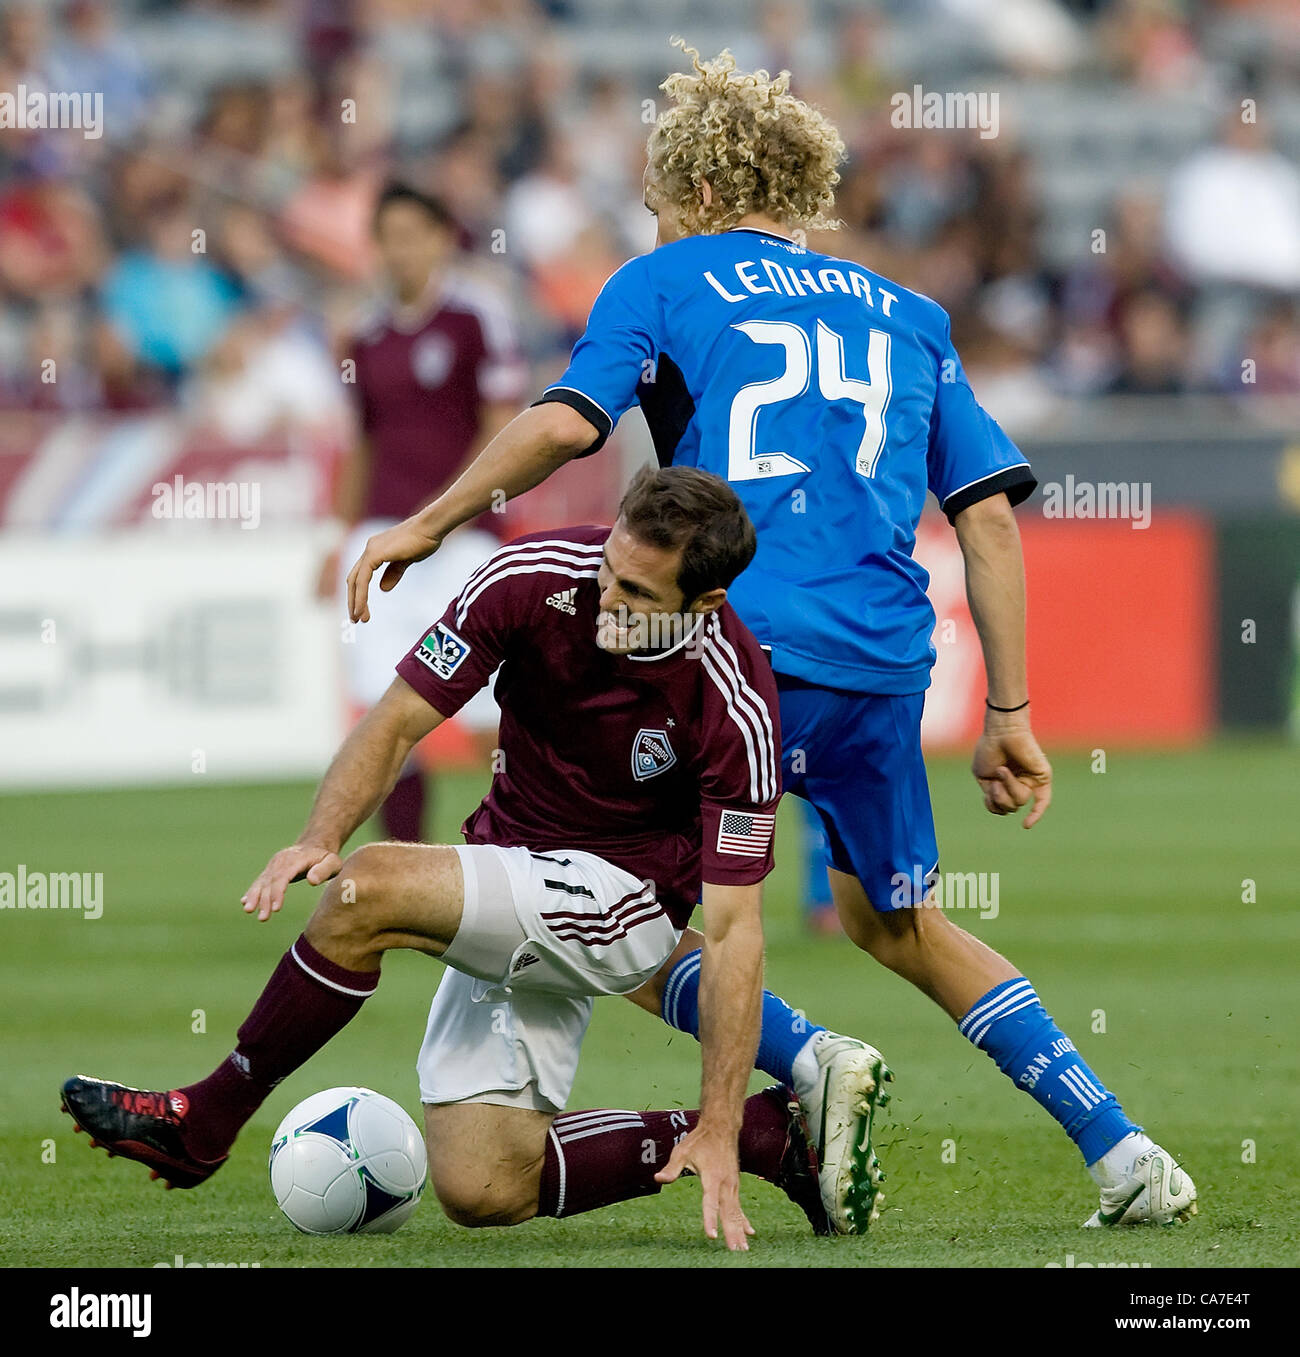 June 20, 2012 - Commerce City, CO, USA - Rapids M BRIAN MULLAN, bottom, gets tangled with Earthquakes F STEVEN LENHART, top, during the 2nd. half at Dick's Sporting Goods Park Wed. evening. The Rapids lose to the Earthquakes 2-1. (Credit Image: © Hector Acevedo/ZUMAPRESS.com) Stock Photo